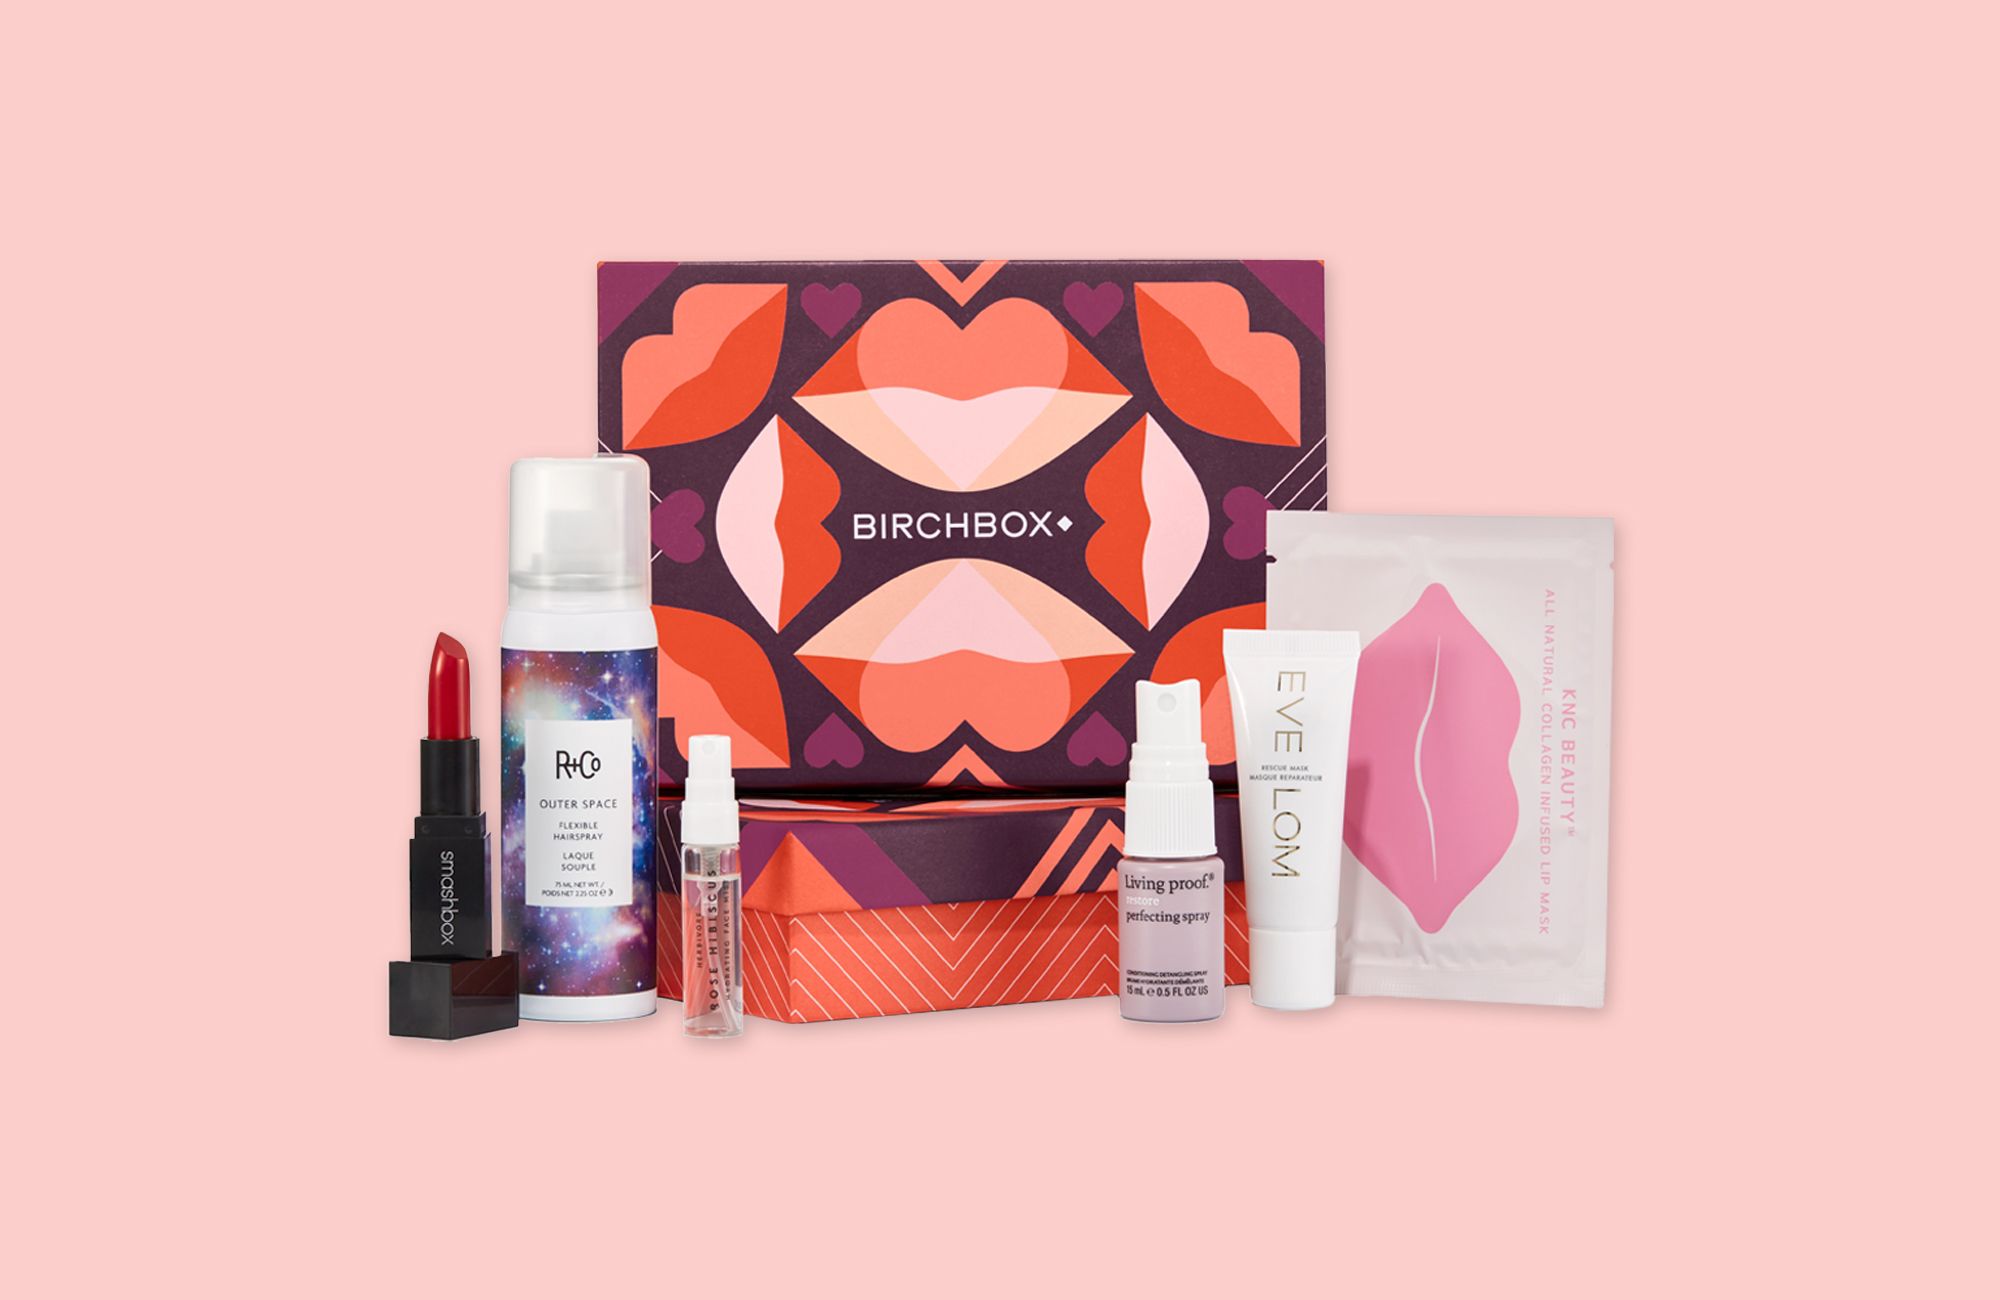 12 Best Makeup Subscription Boxes 2022 - Top Monthly Beauty Boxes